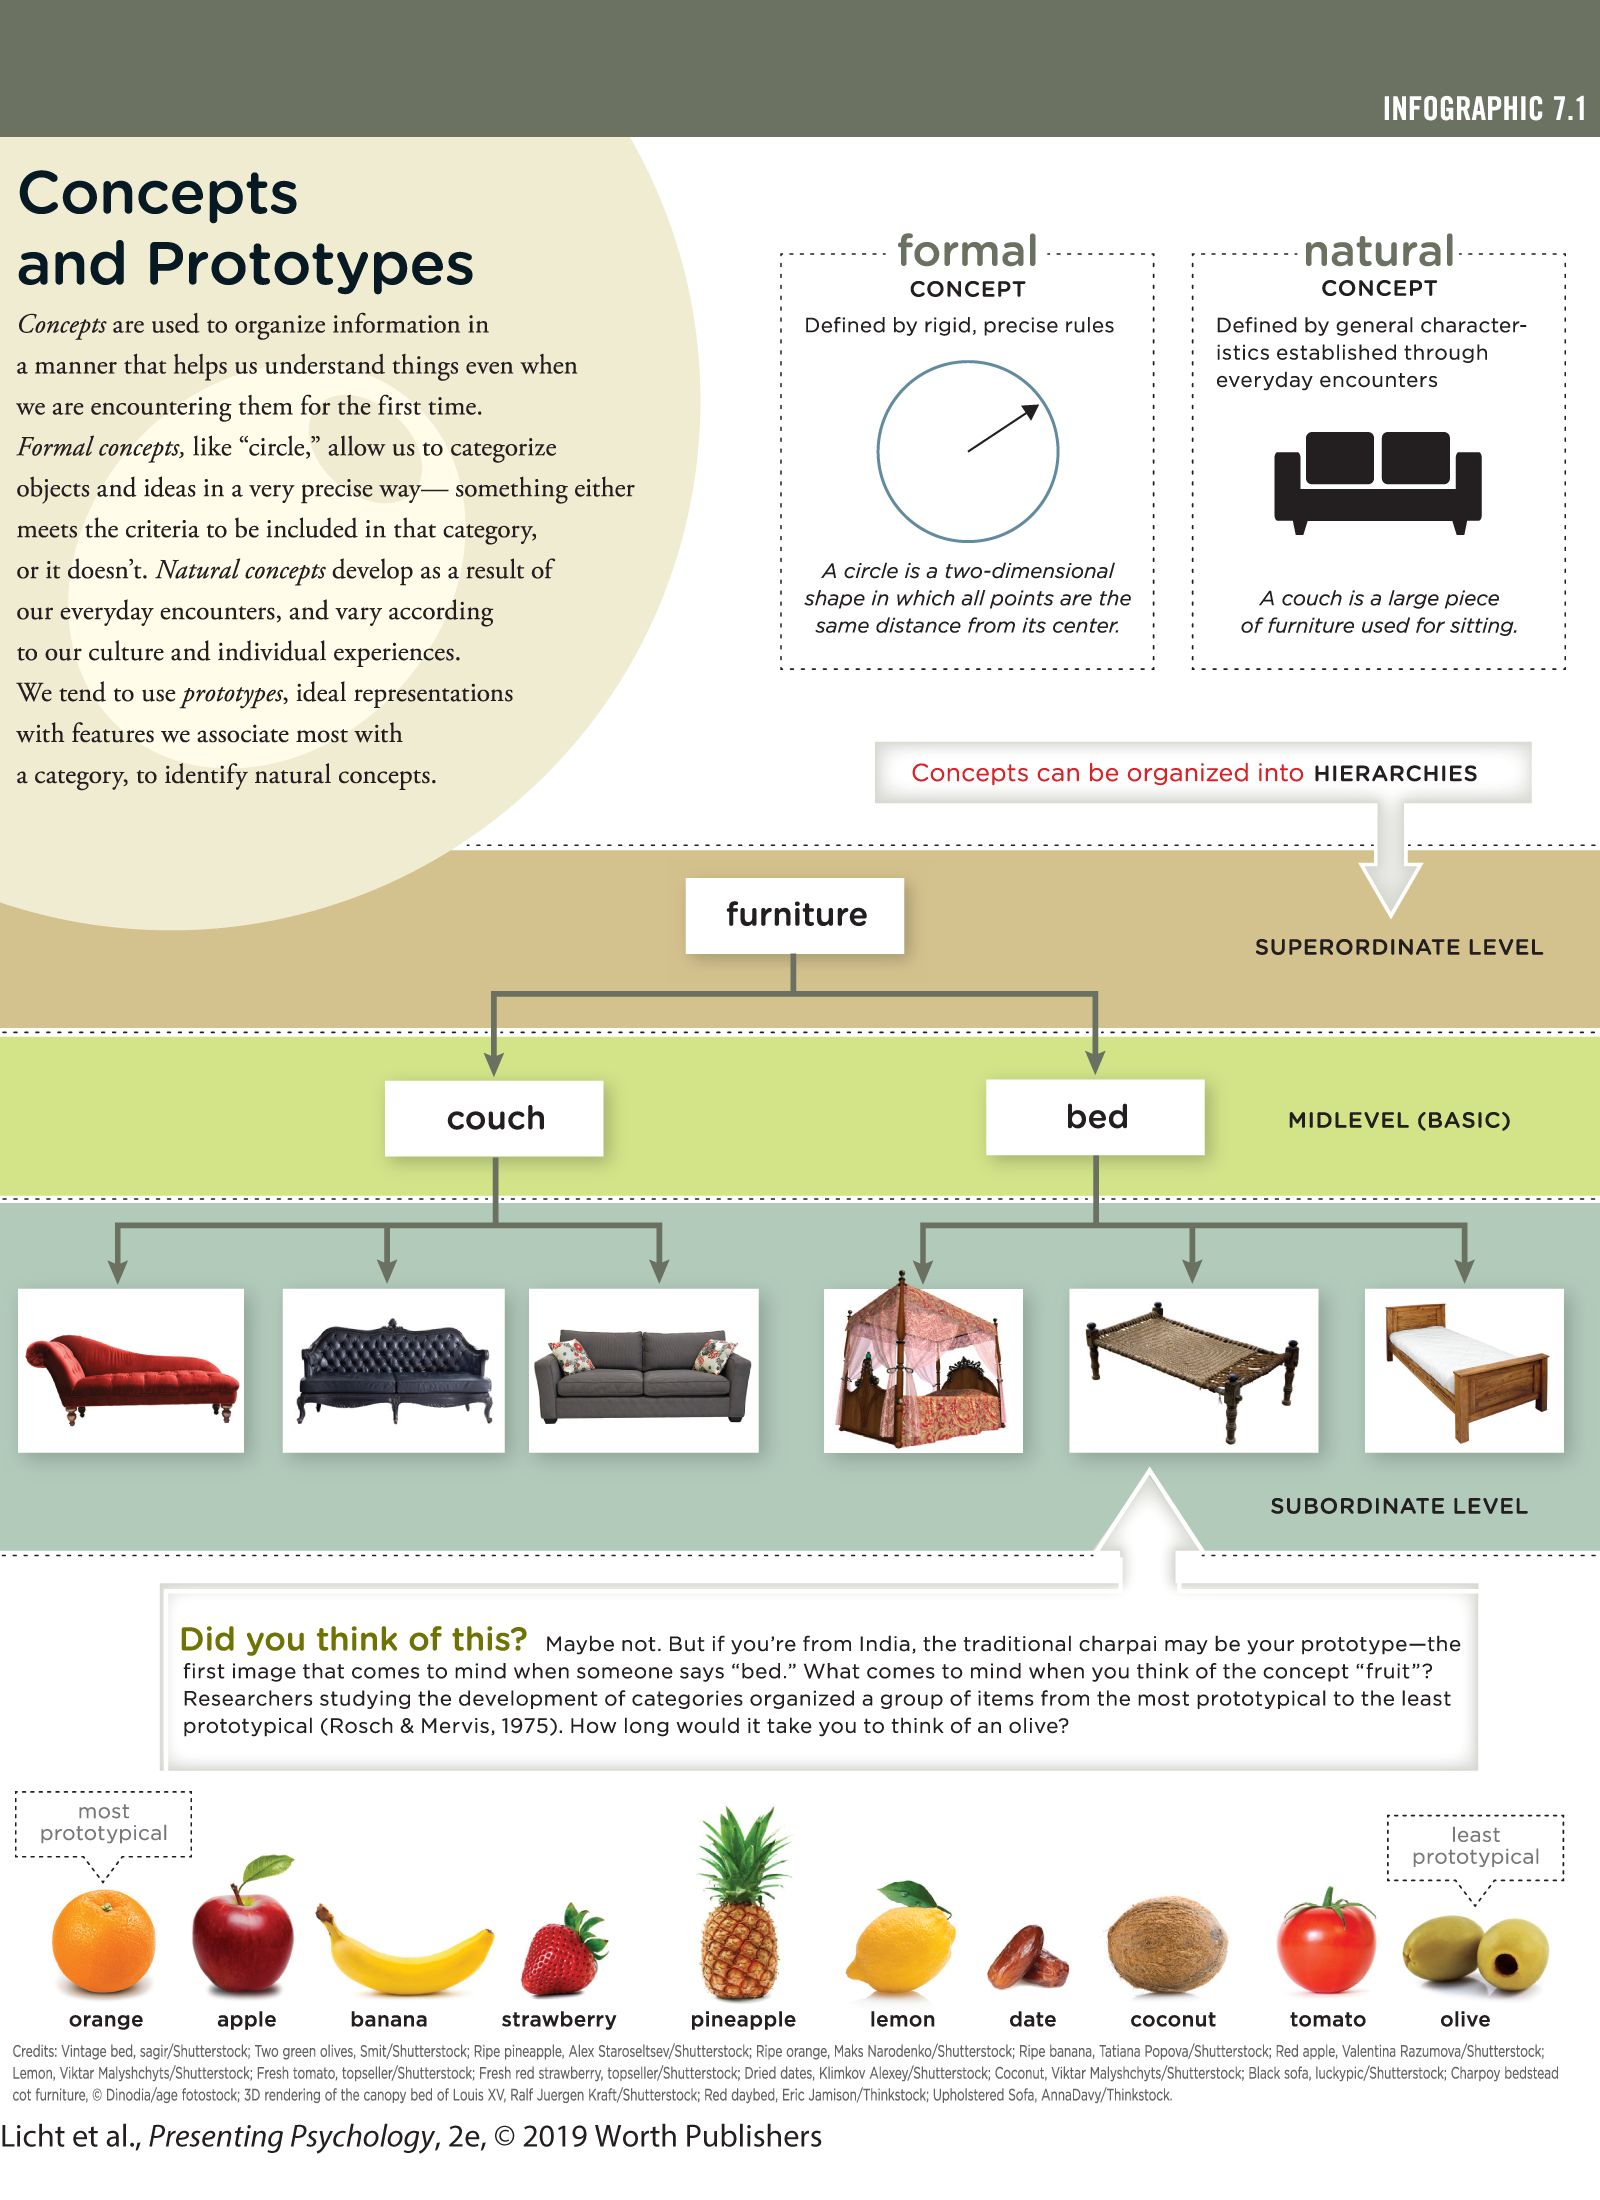 An infographic titled, Concepts and Prototypes explains the formal concept and natural concept, and prototypes keeping furniture and fruits as examples. You can read full description from the link below